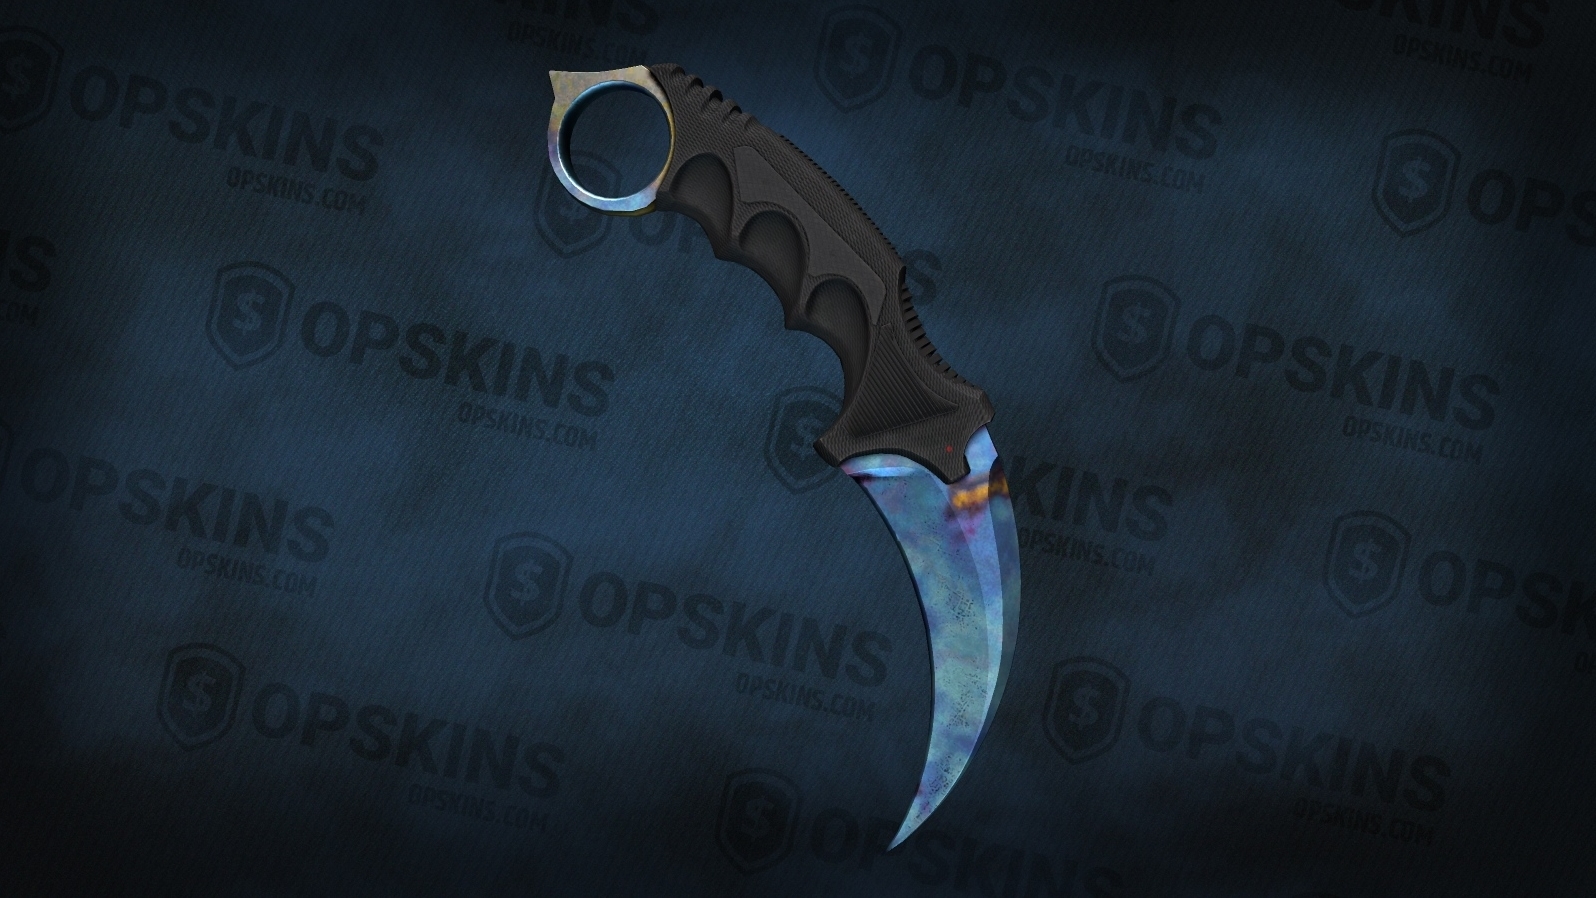 [Discussion] What is your favorite or dream knife? : r/GlobalOffensiveTrade